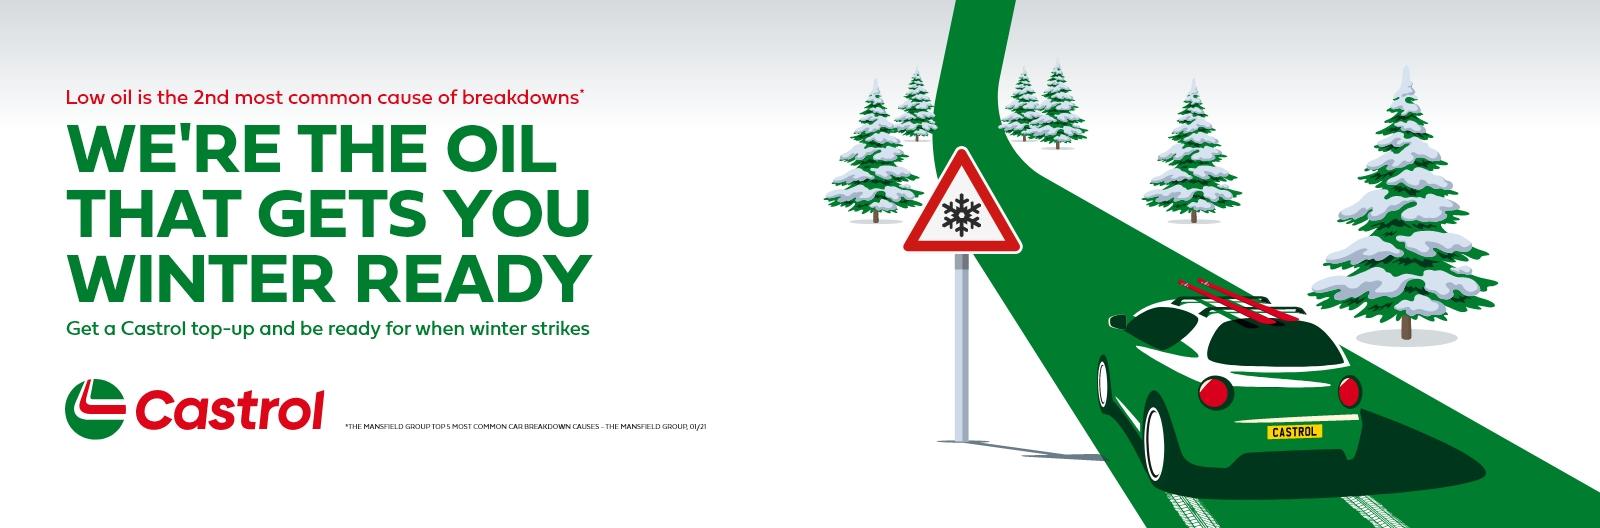 Castrol - We're the oil that gets you winter ready